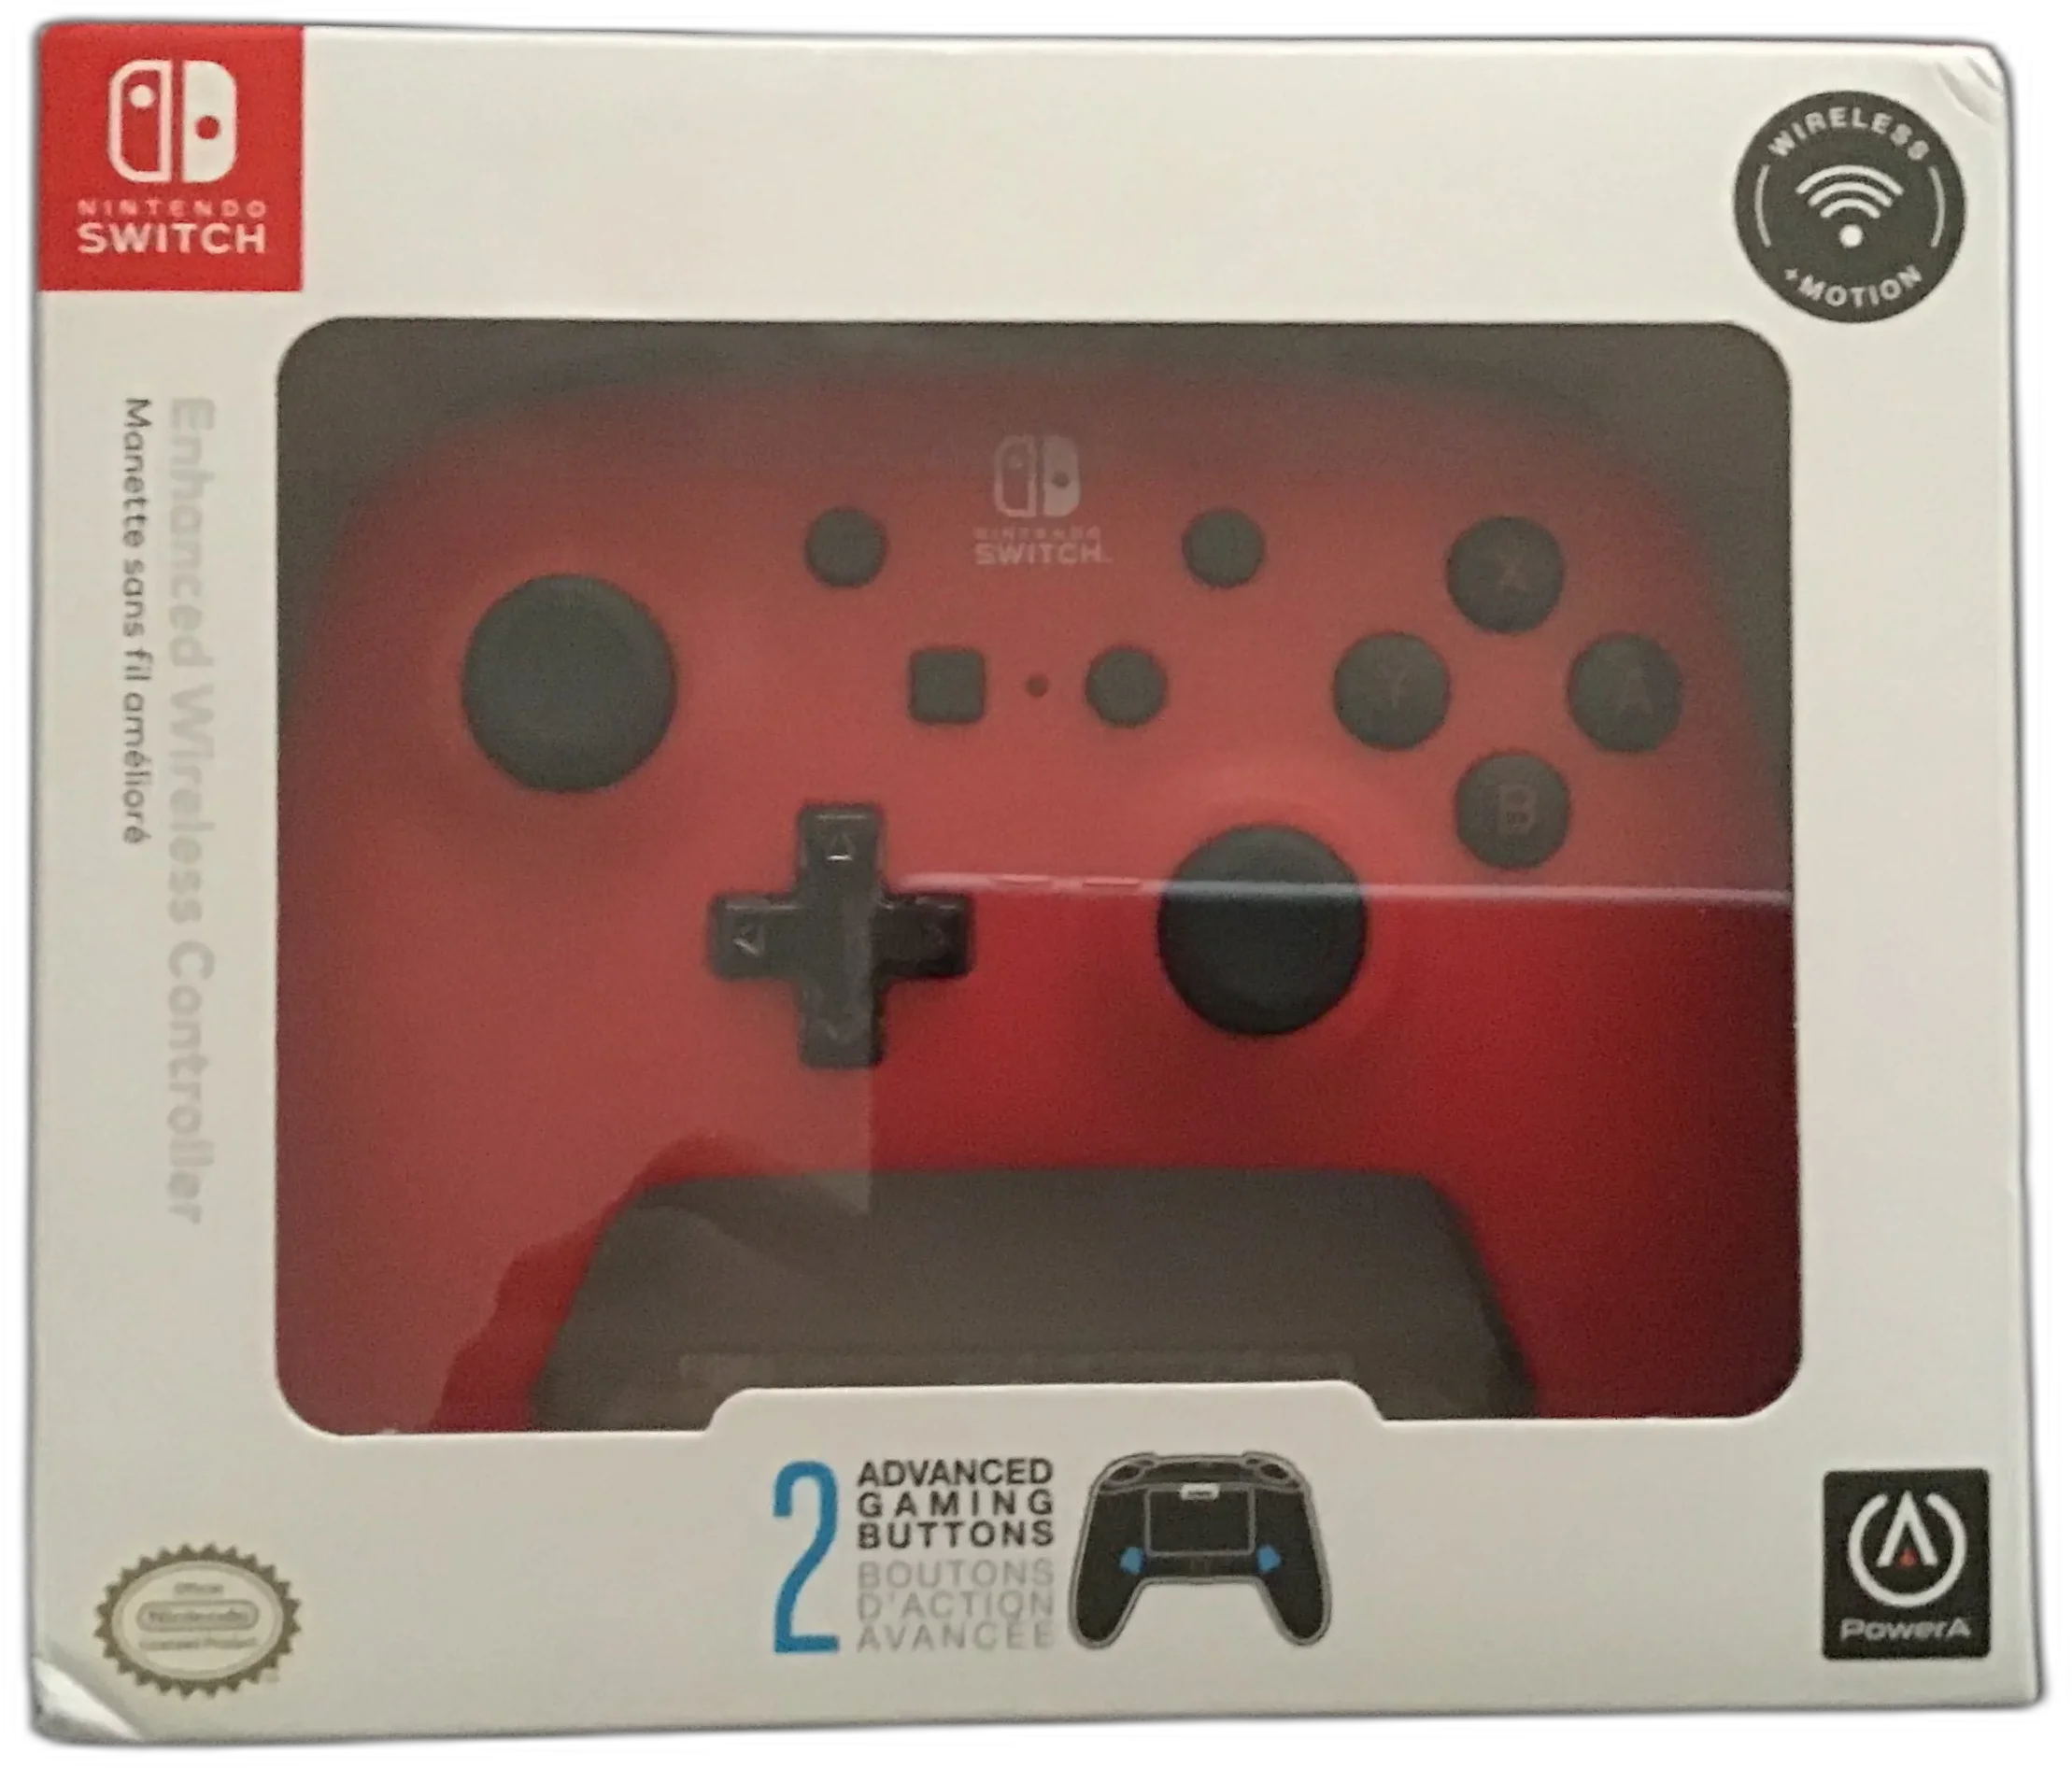  Power A Switch Red Enhanced Wireless Controller